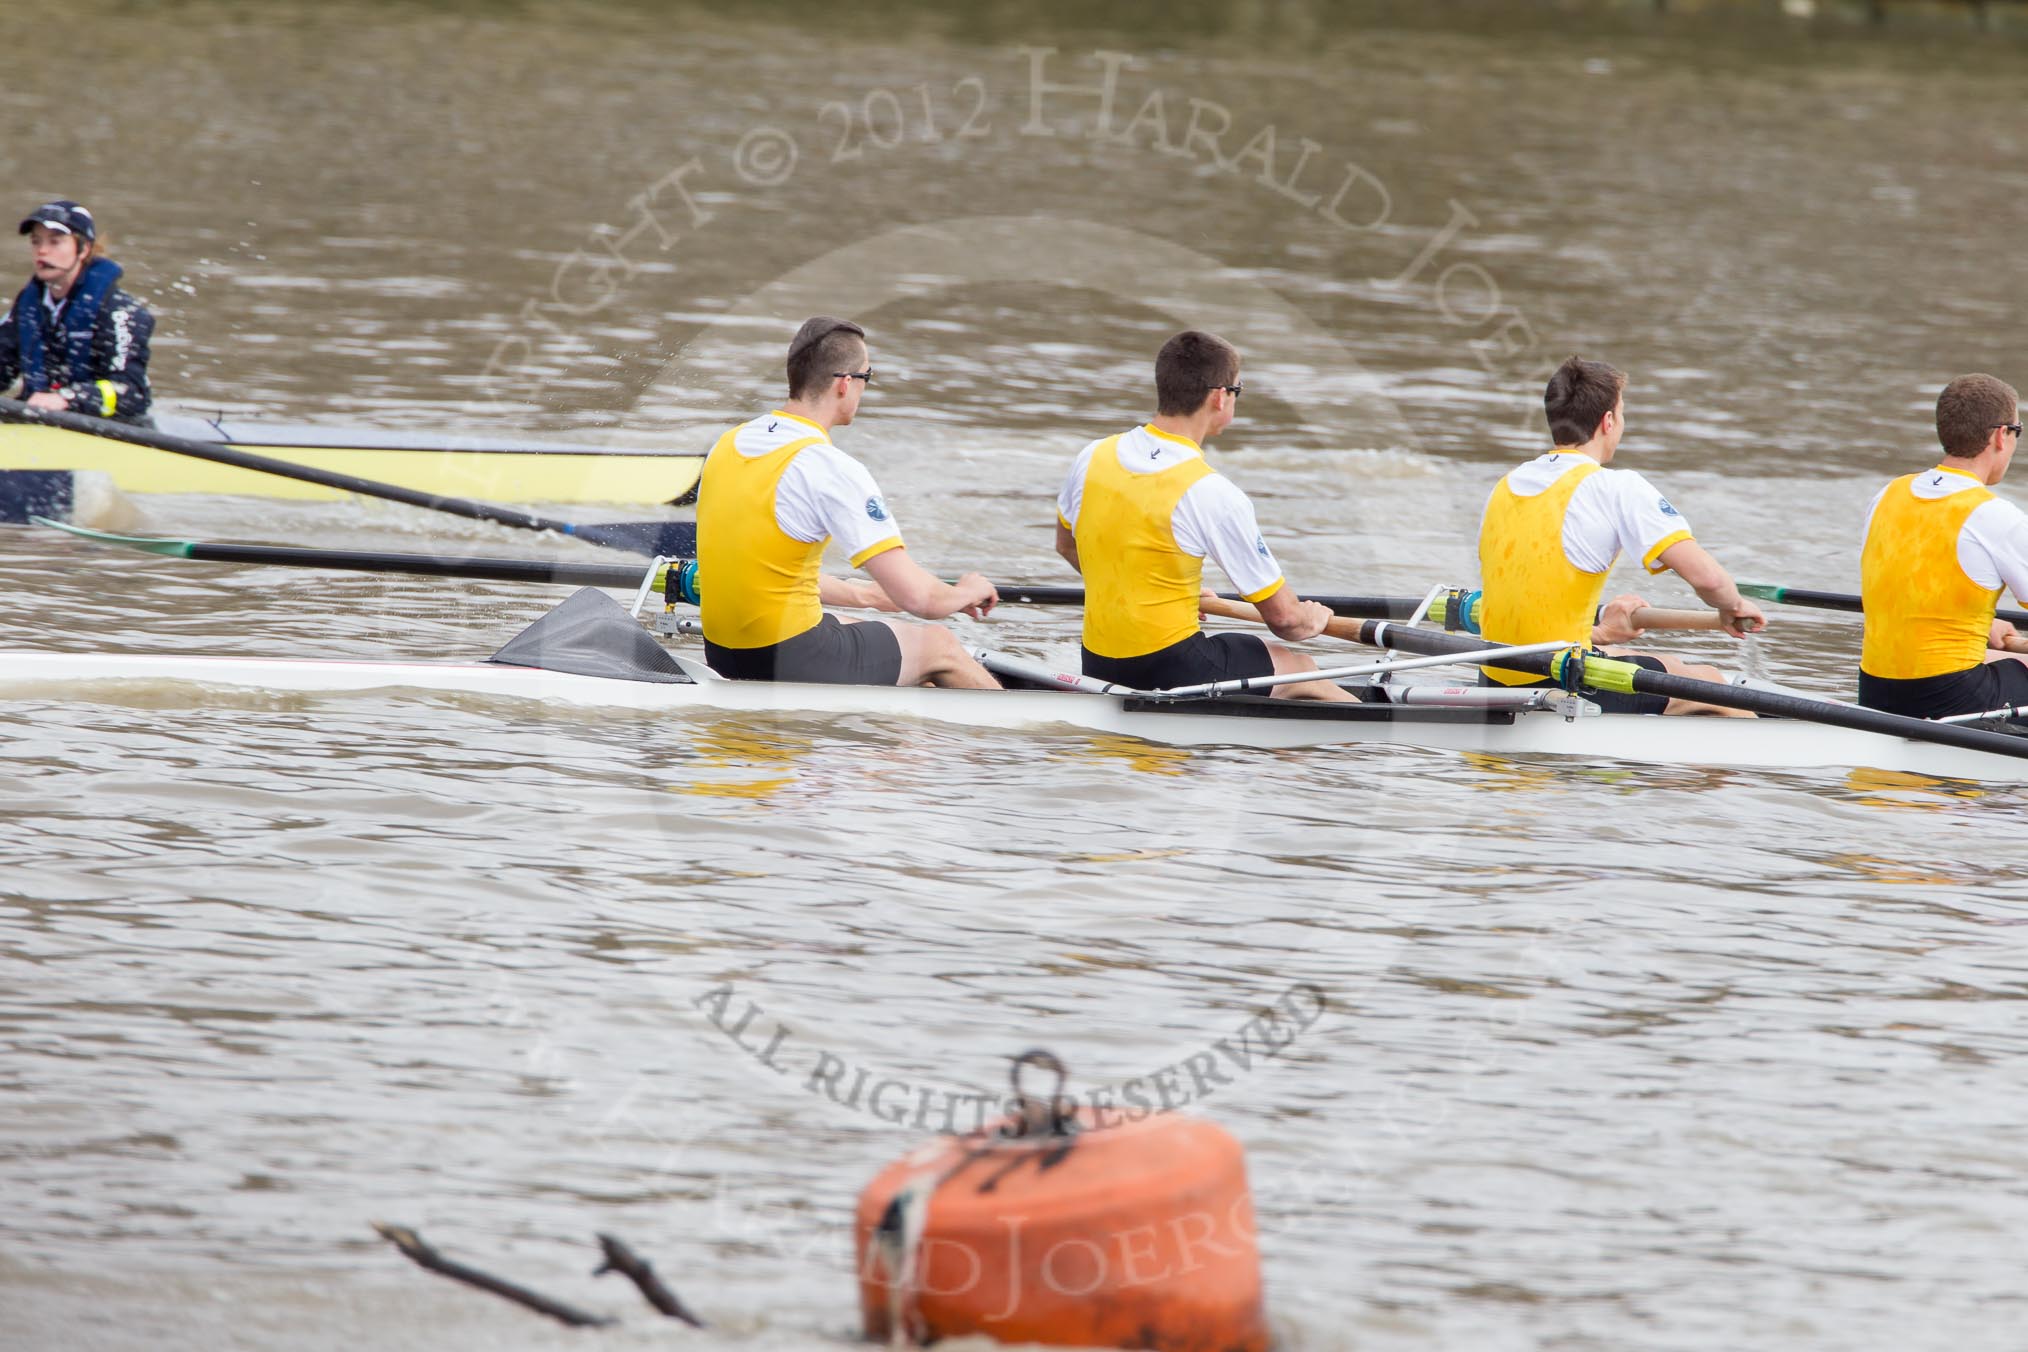 The Boat Race 2012: The Cambridge reserve boat Goldie in the Boat Race with the Oxford boat Isis. Bow Josh Pendry, Rowan Lawson, Peter Dewhurst, and Tom Haworth. In Isis cox Katherine Apfelbaum..




on 07 April 2012 at 13:46, image #163